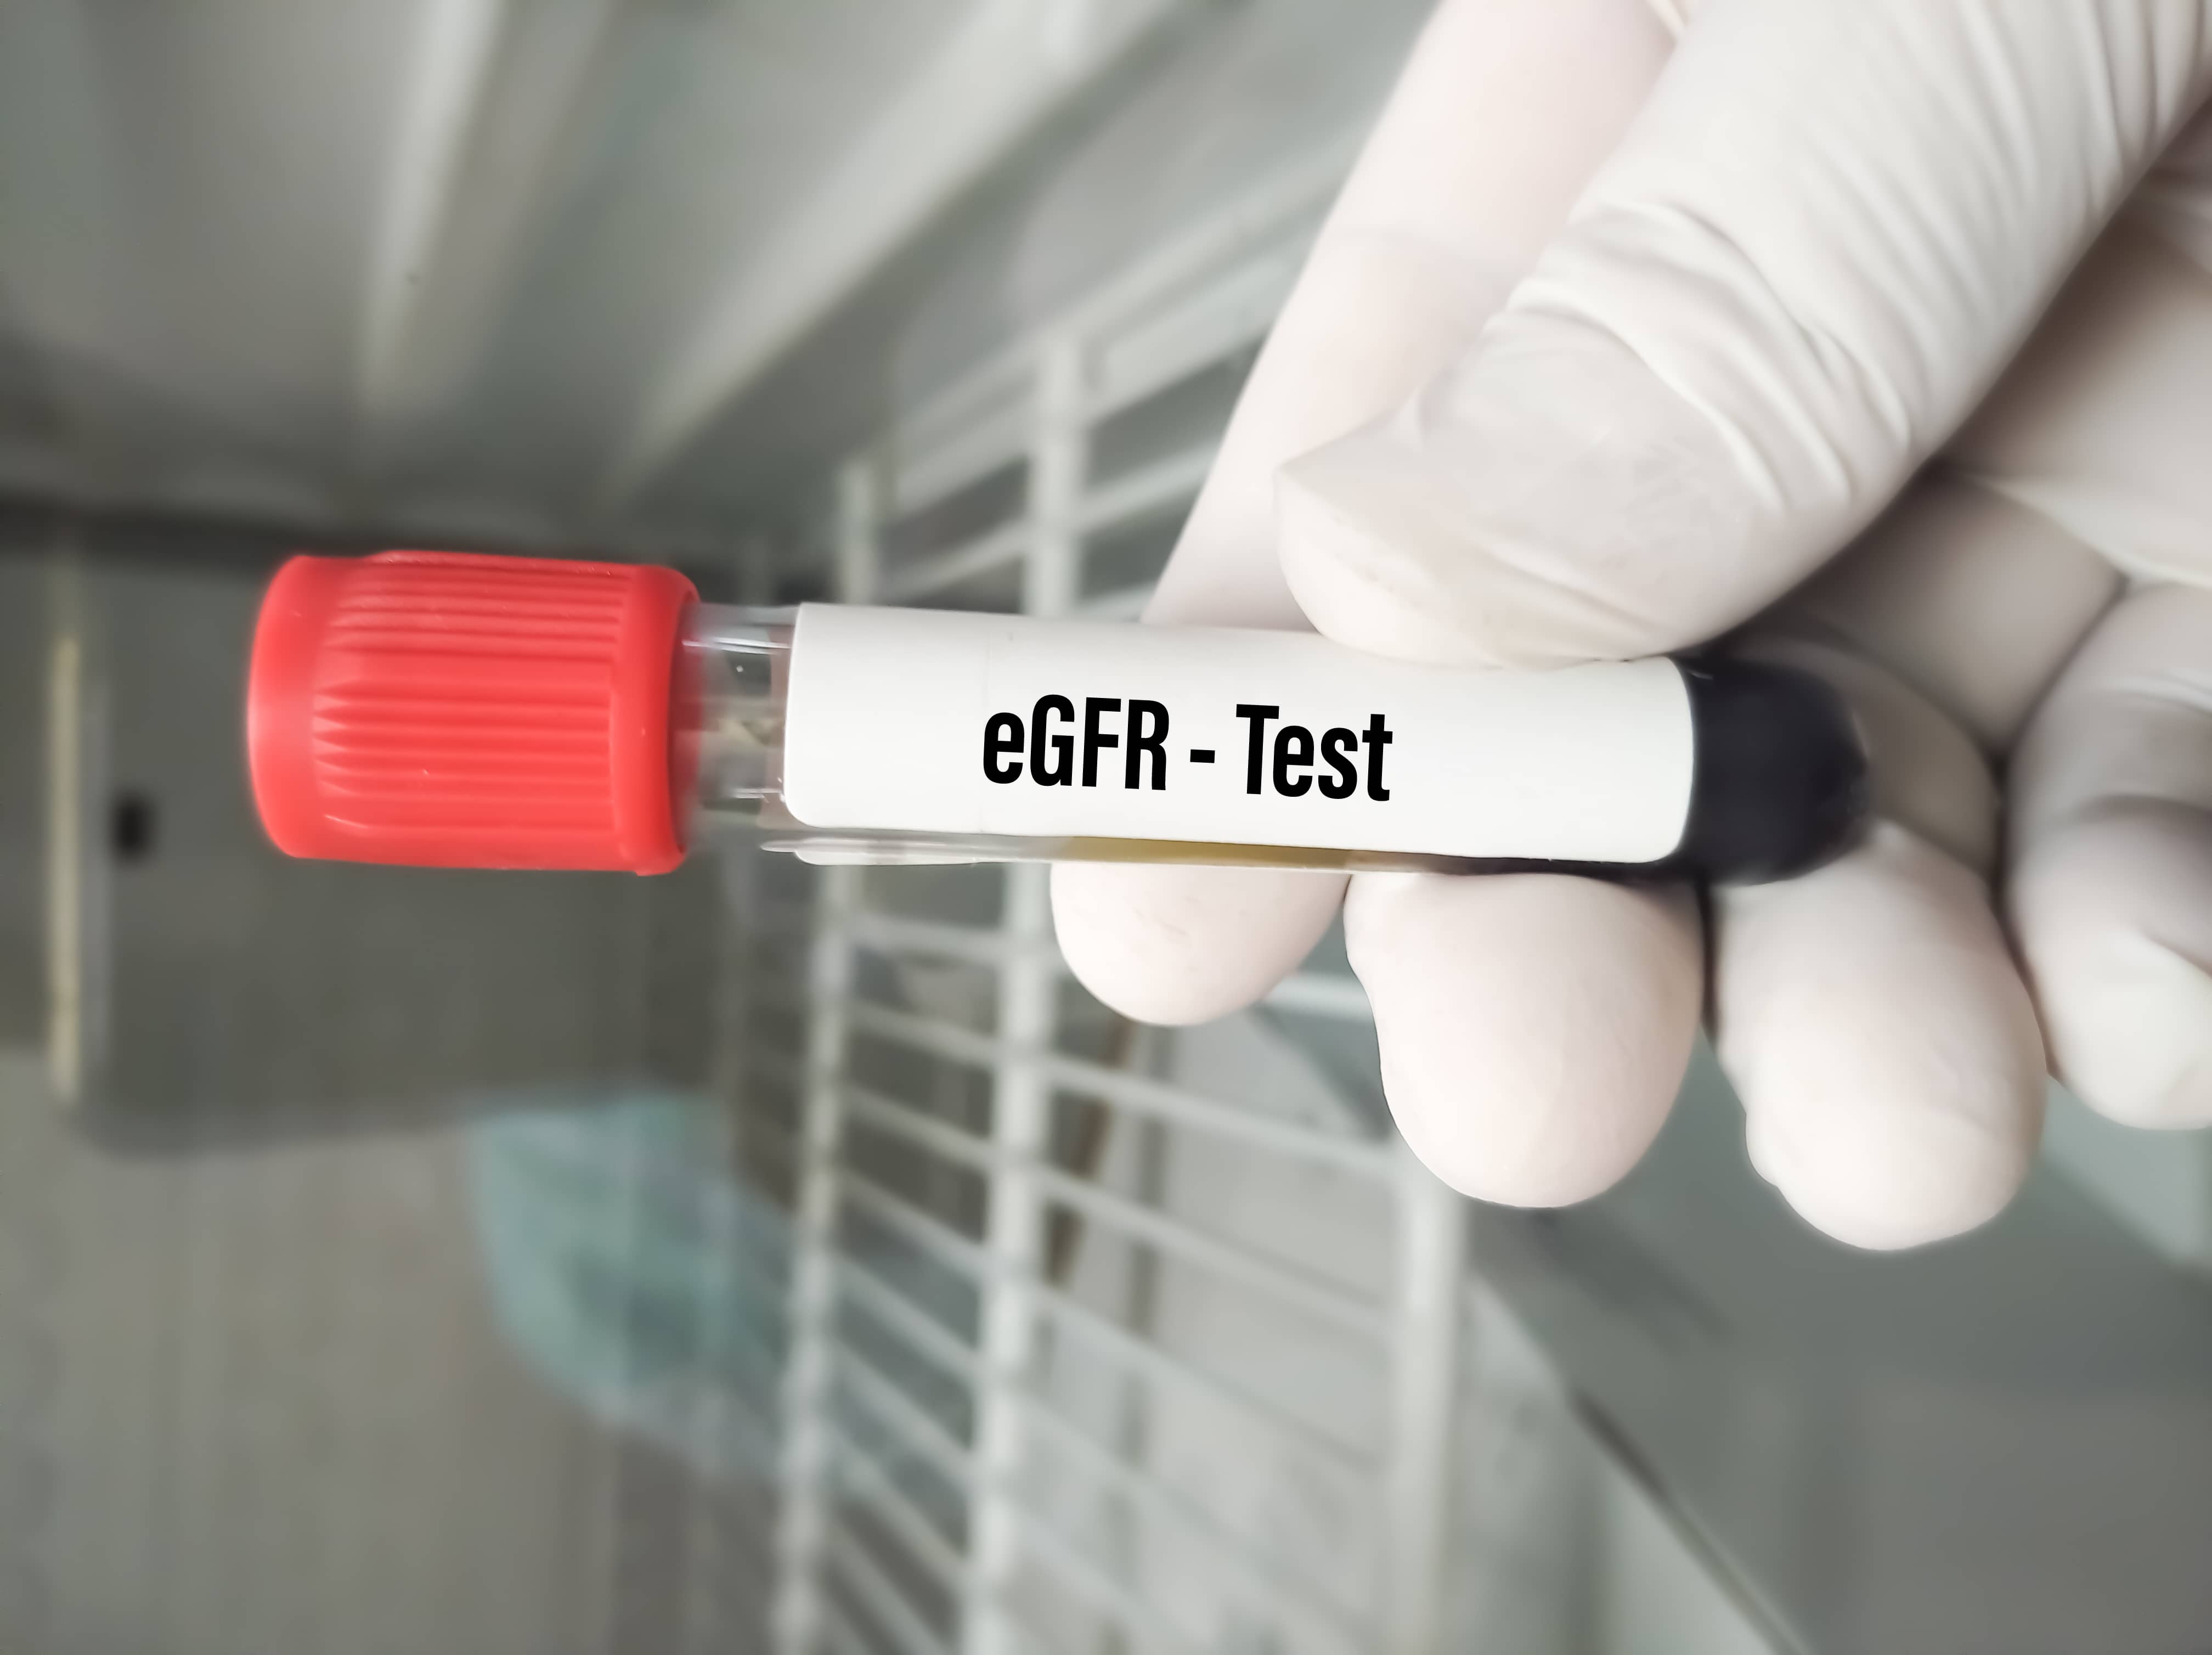 A photo of a blood sample vial ready for estimated glomerular filtration rate, or eGFR, testing.